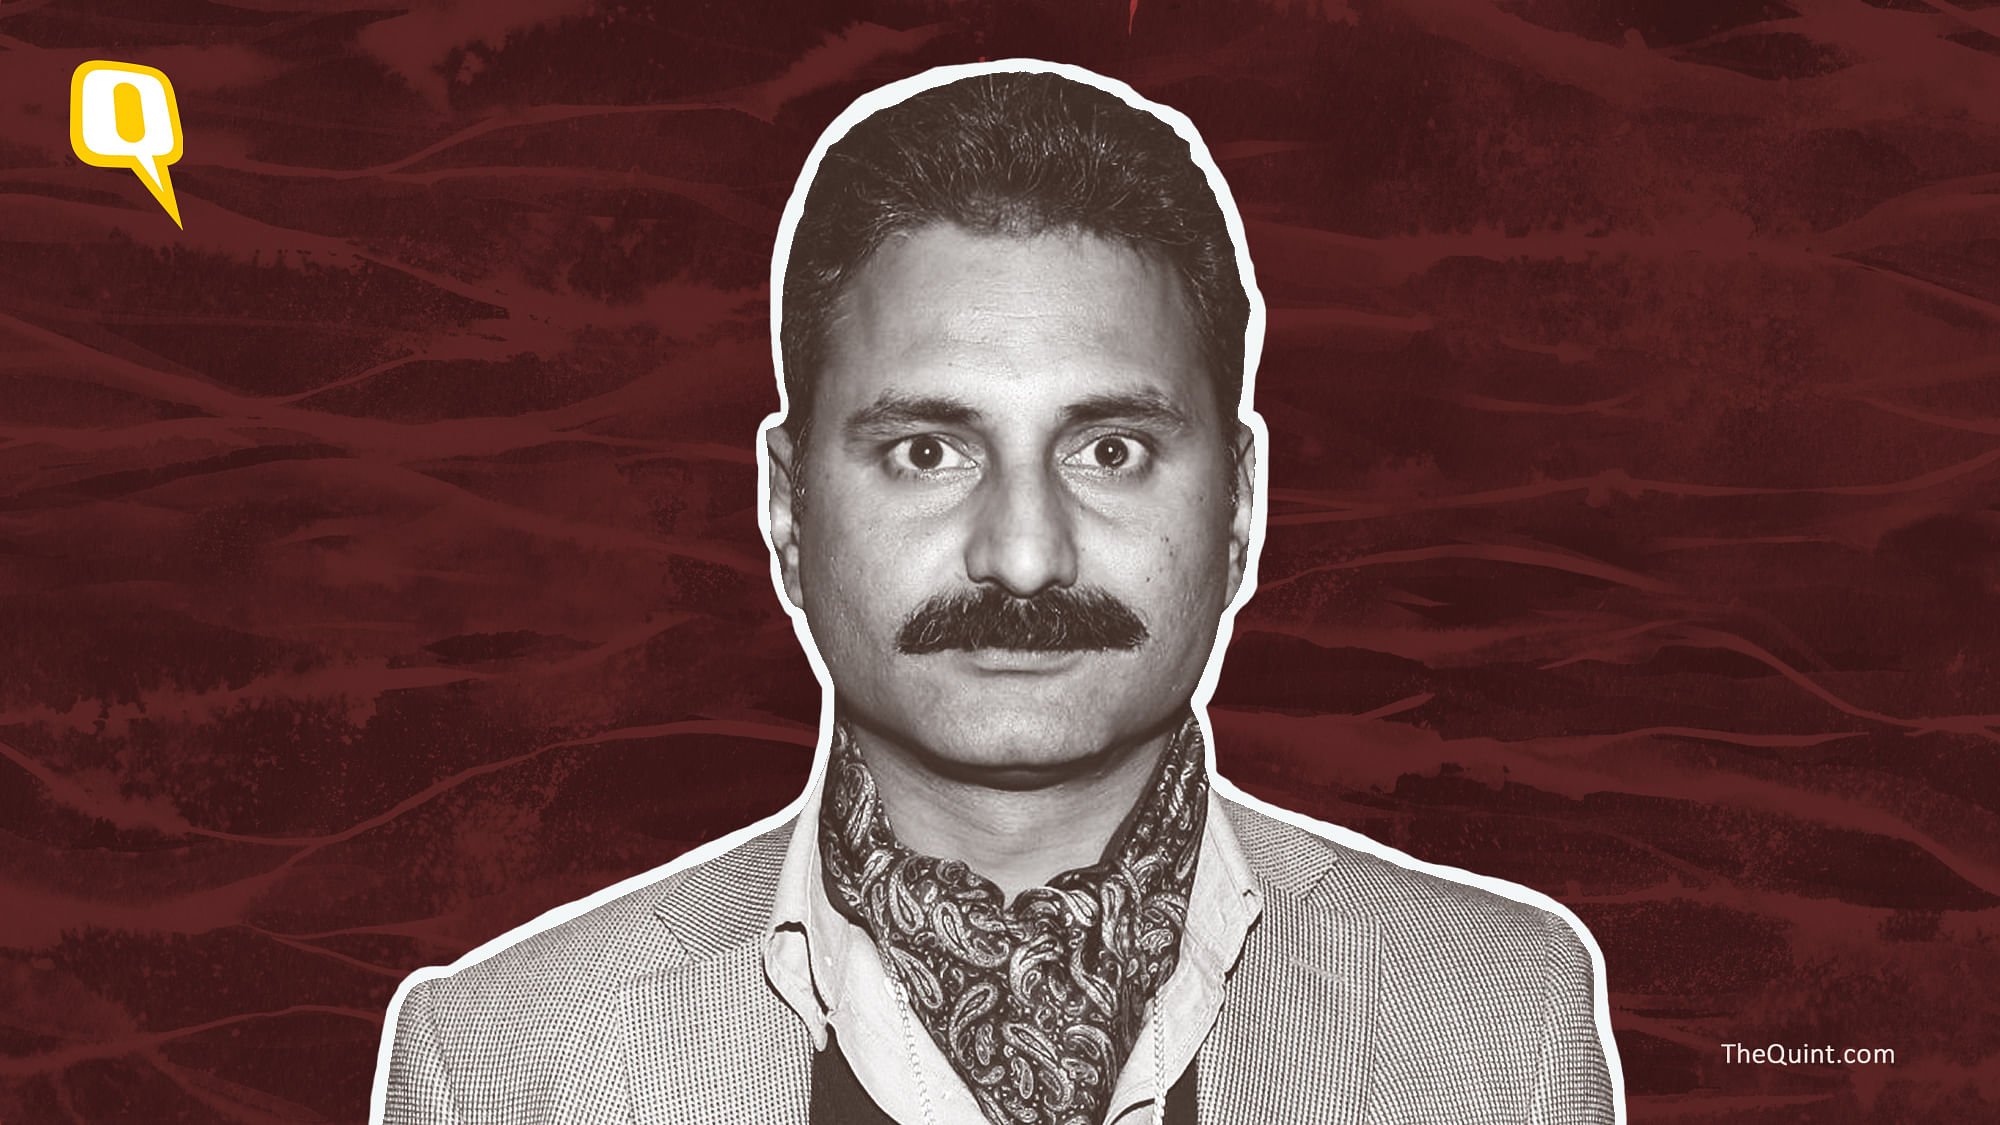 Less than 18 months after being held guilty of rape, Mahmood Farooqui was acquitted of all charges by the Delhi High Court.